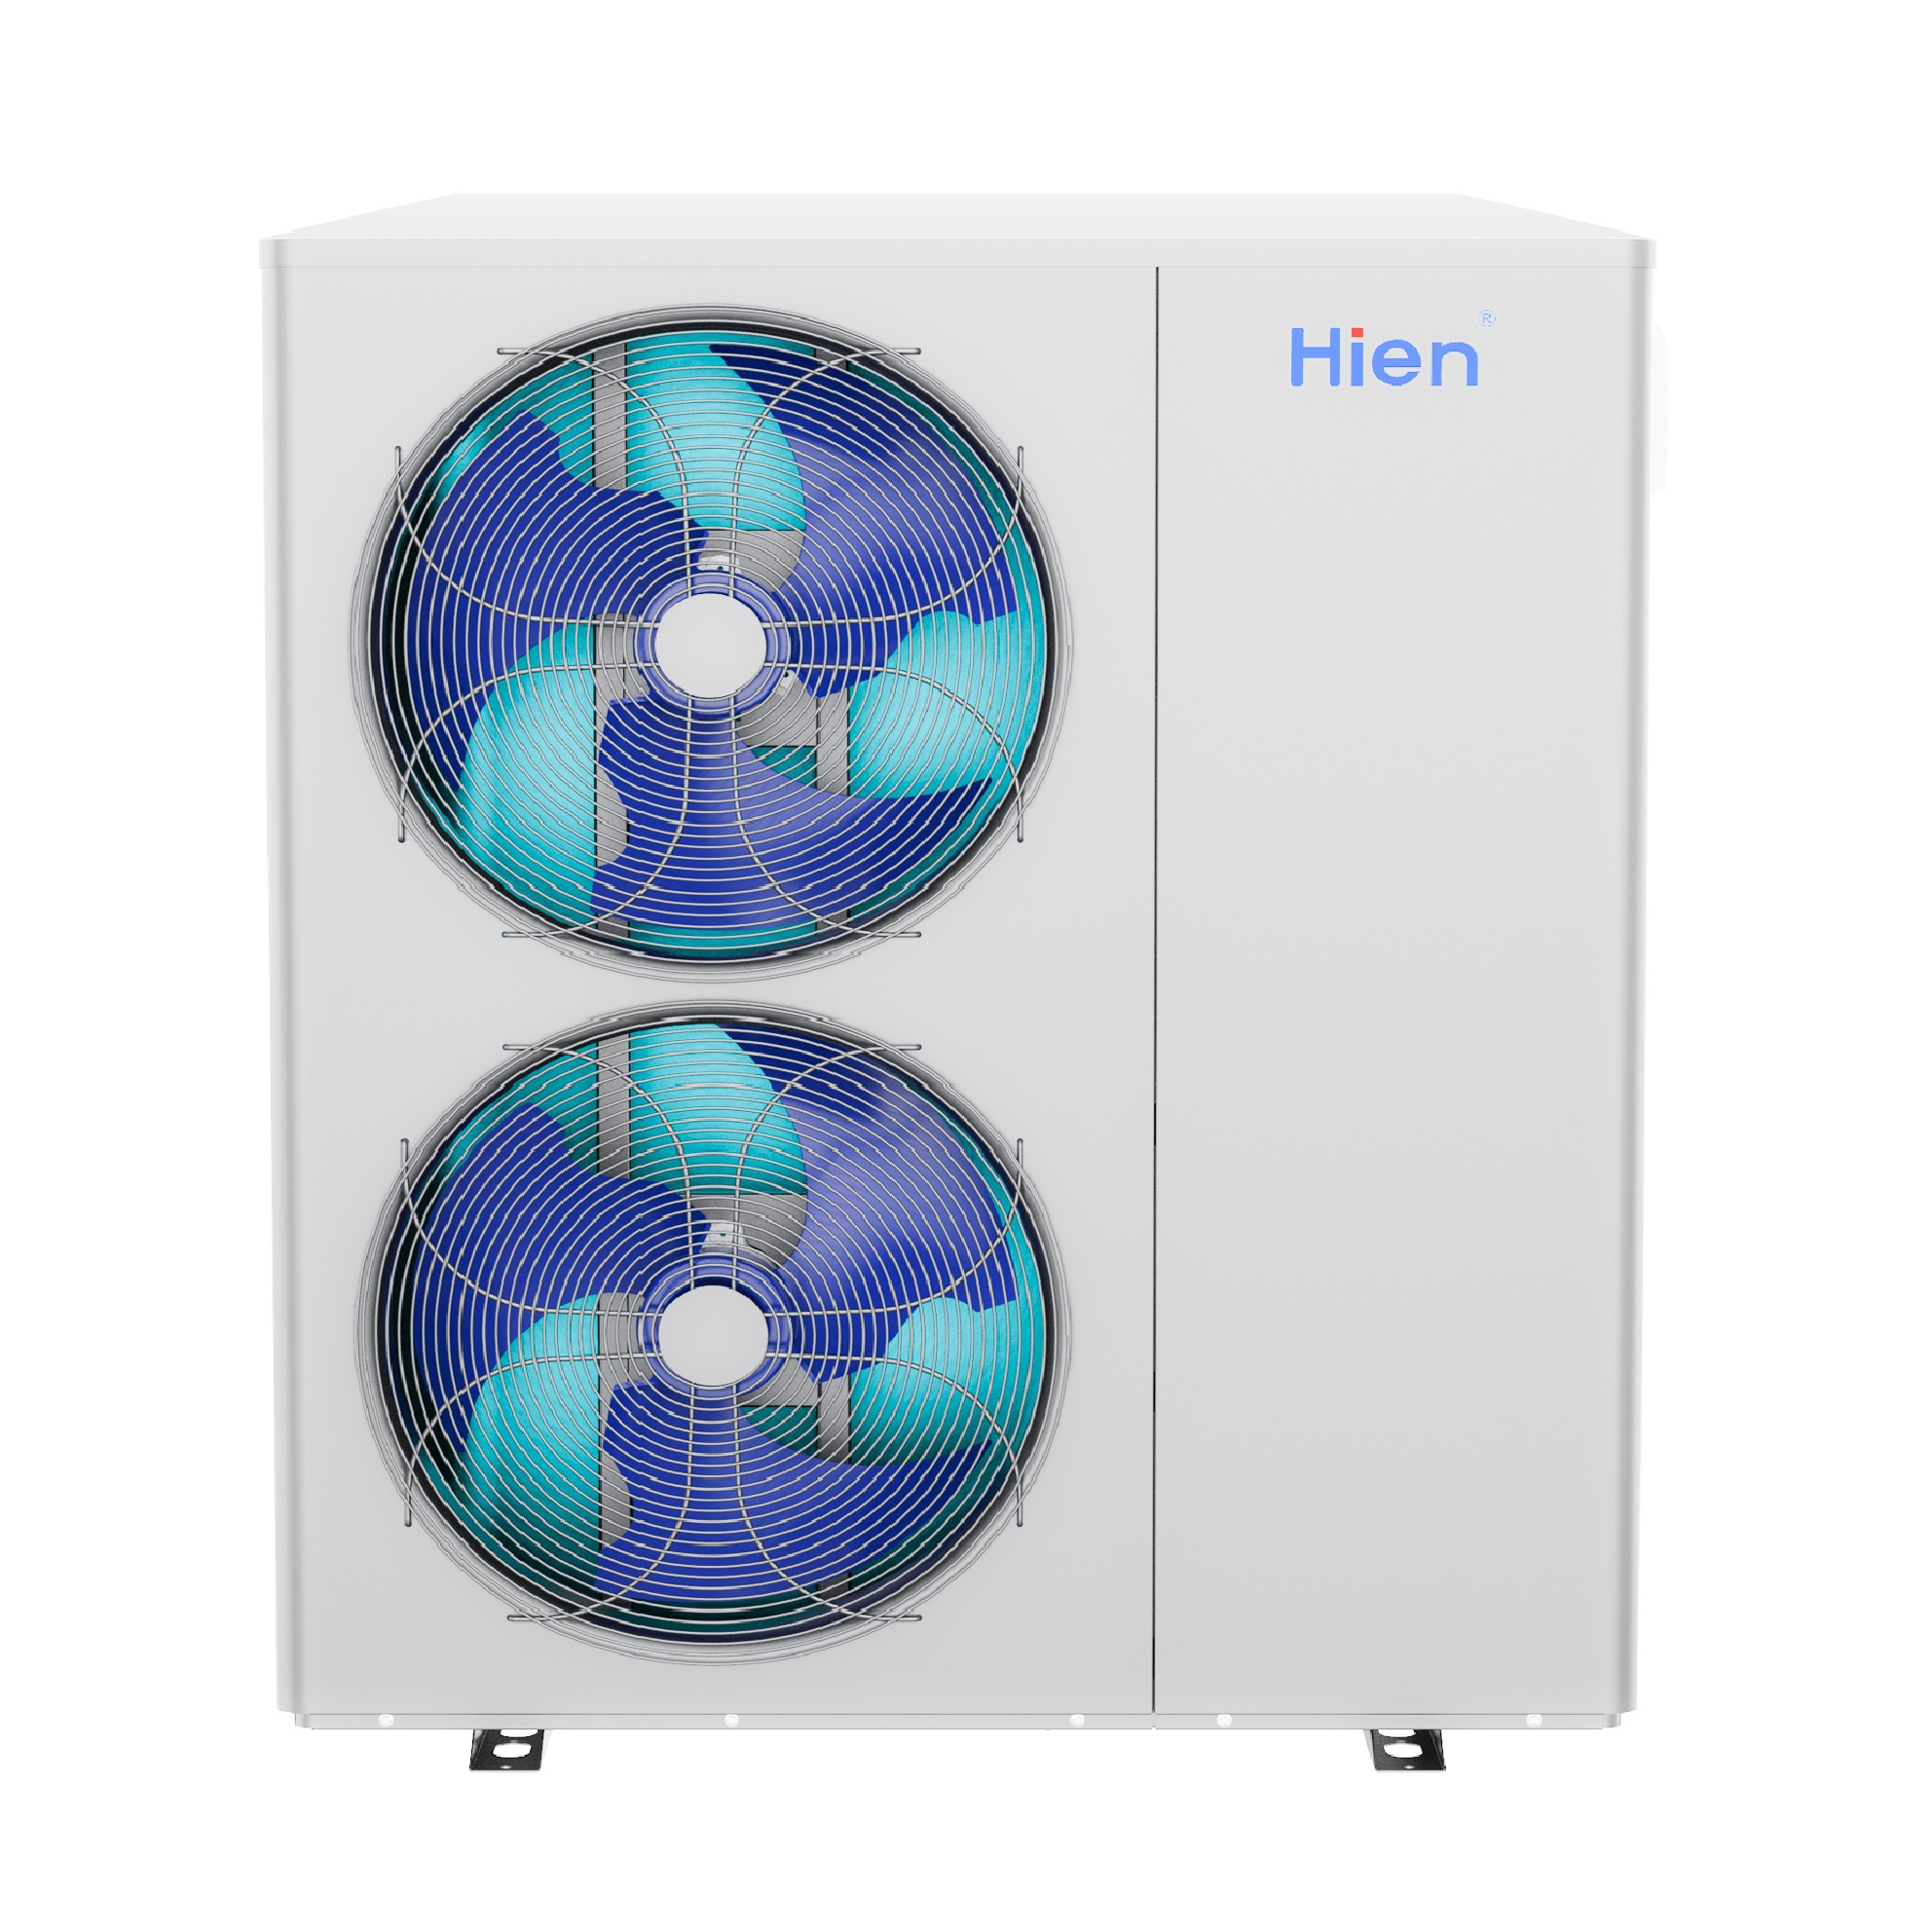 China wholesale Portable Air Conditioner And Heat Pump Manufacturer - Air Source Heap Pump For House Heating/Cooling and DHW All In One – Hien